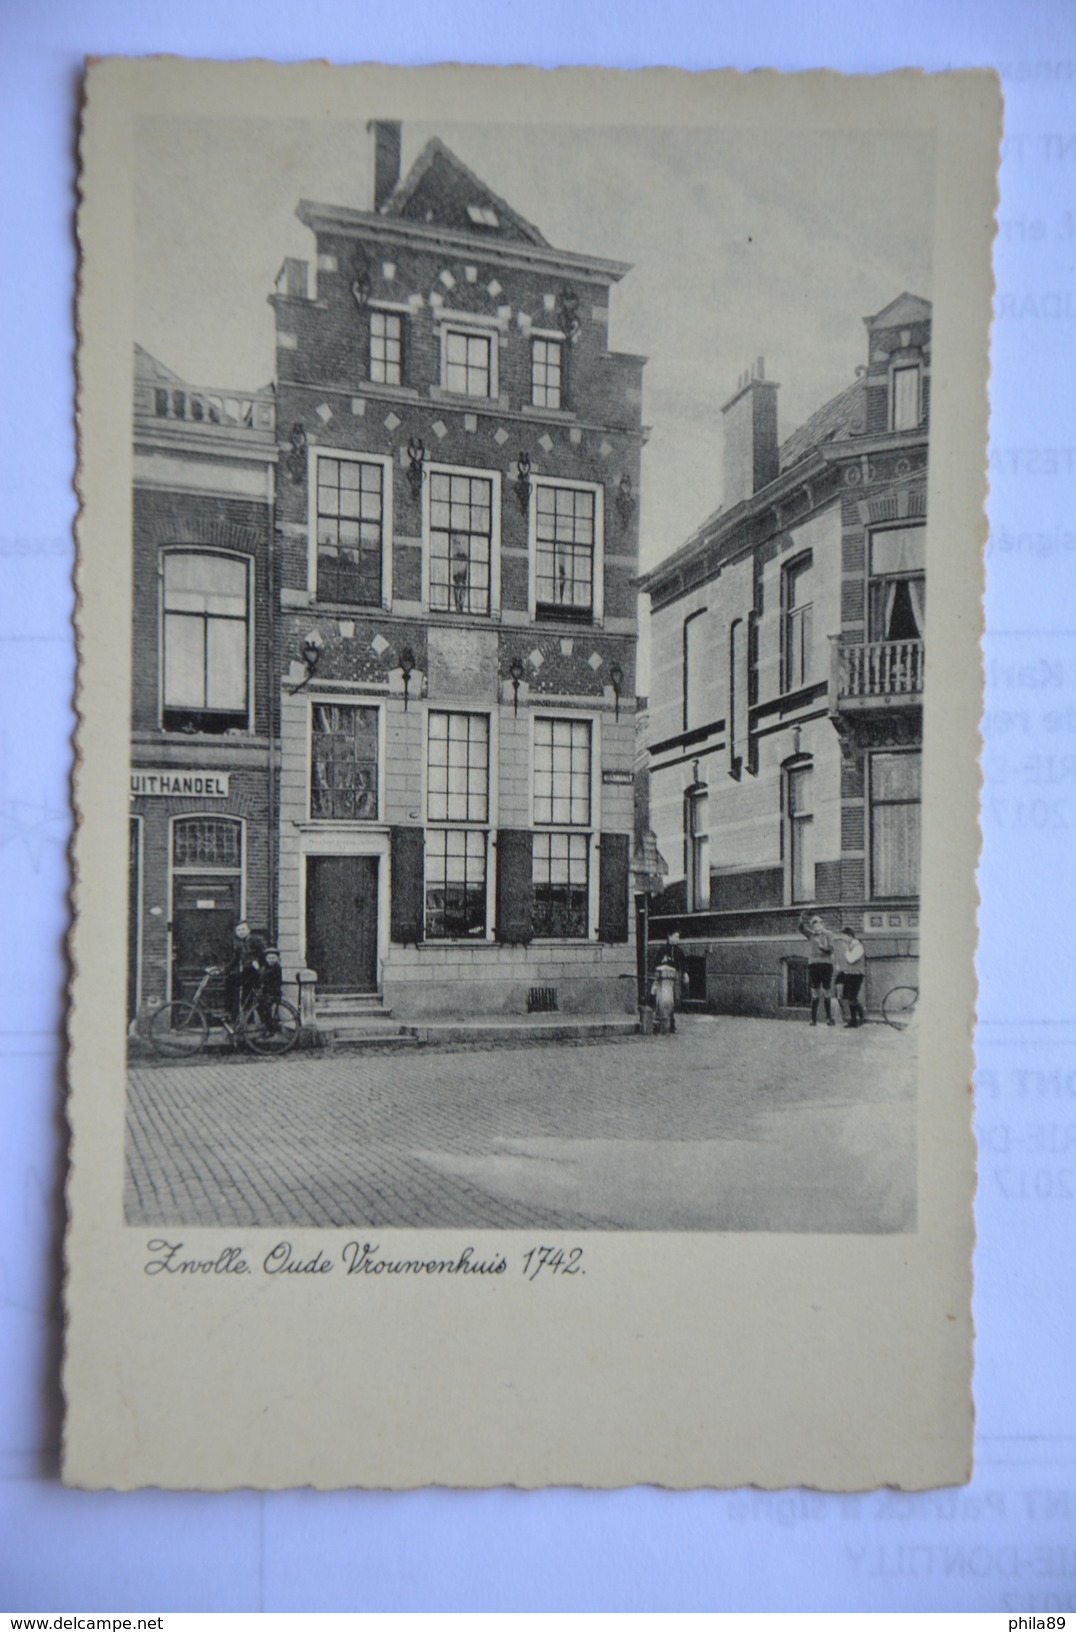 ZWOLLE-oude Vrounvenhuis 1742 - Zwolle